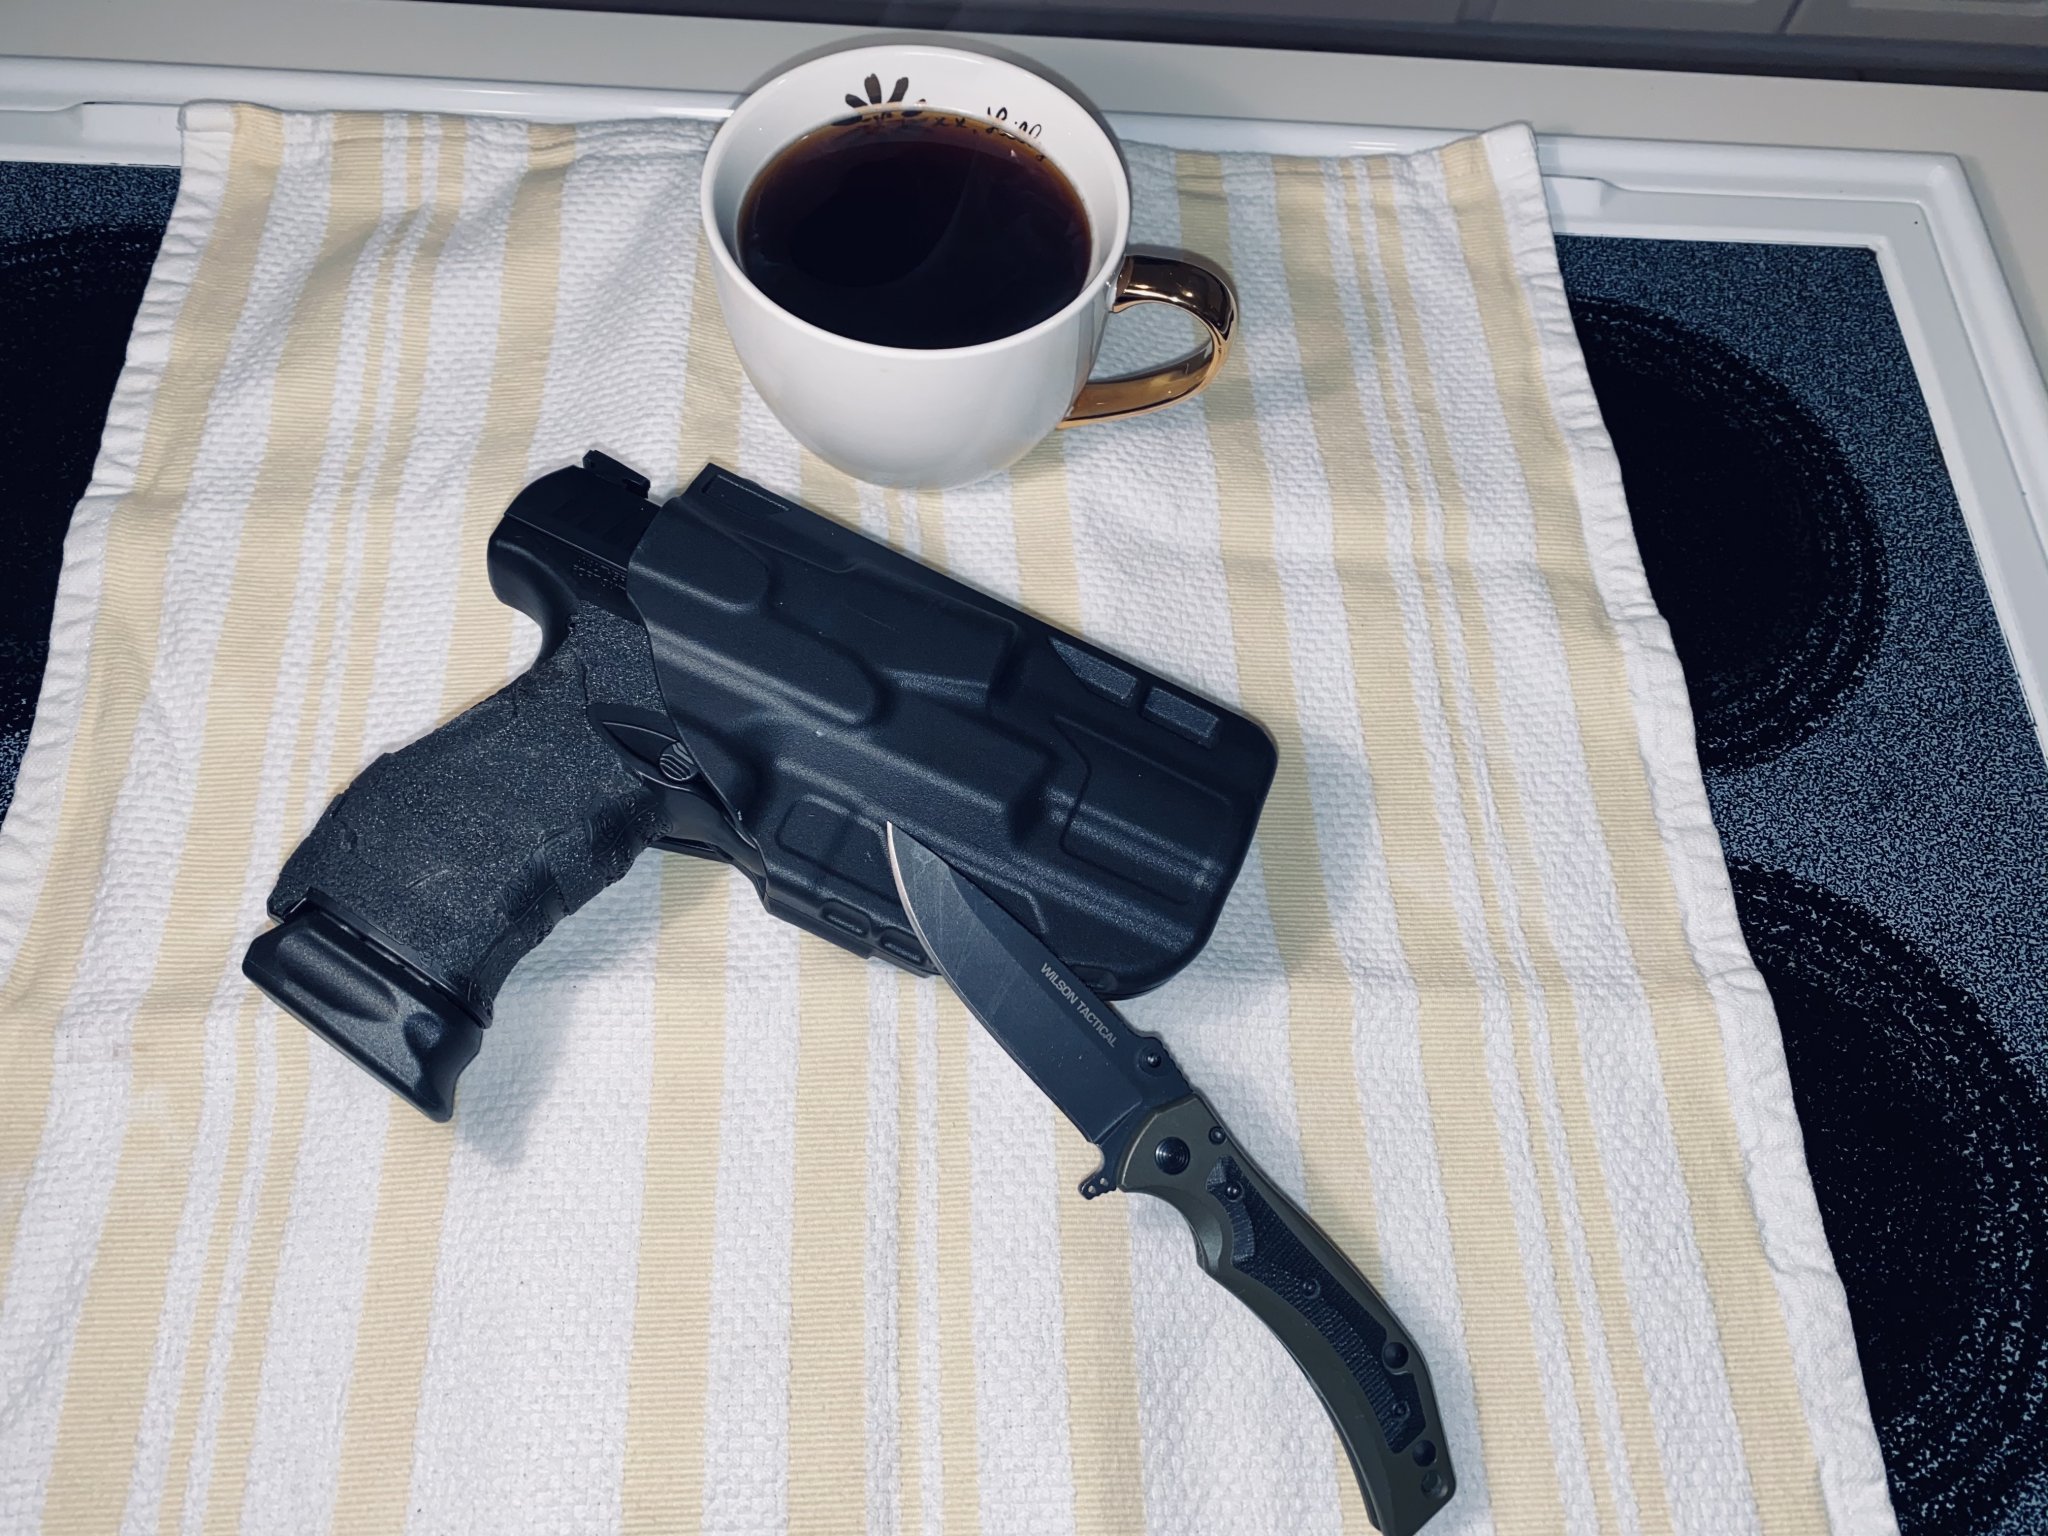 IMG_3880Walther PPQ M2 with Coffee Photos.jpeg